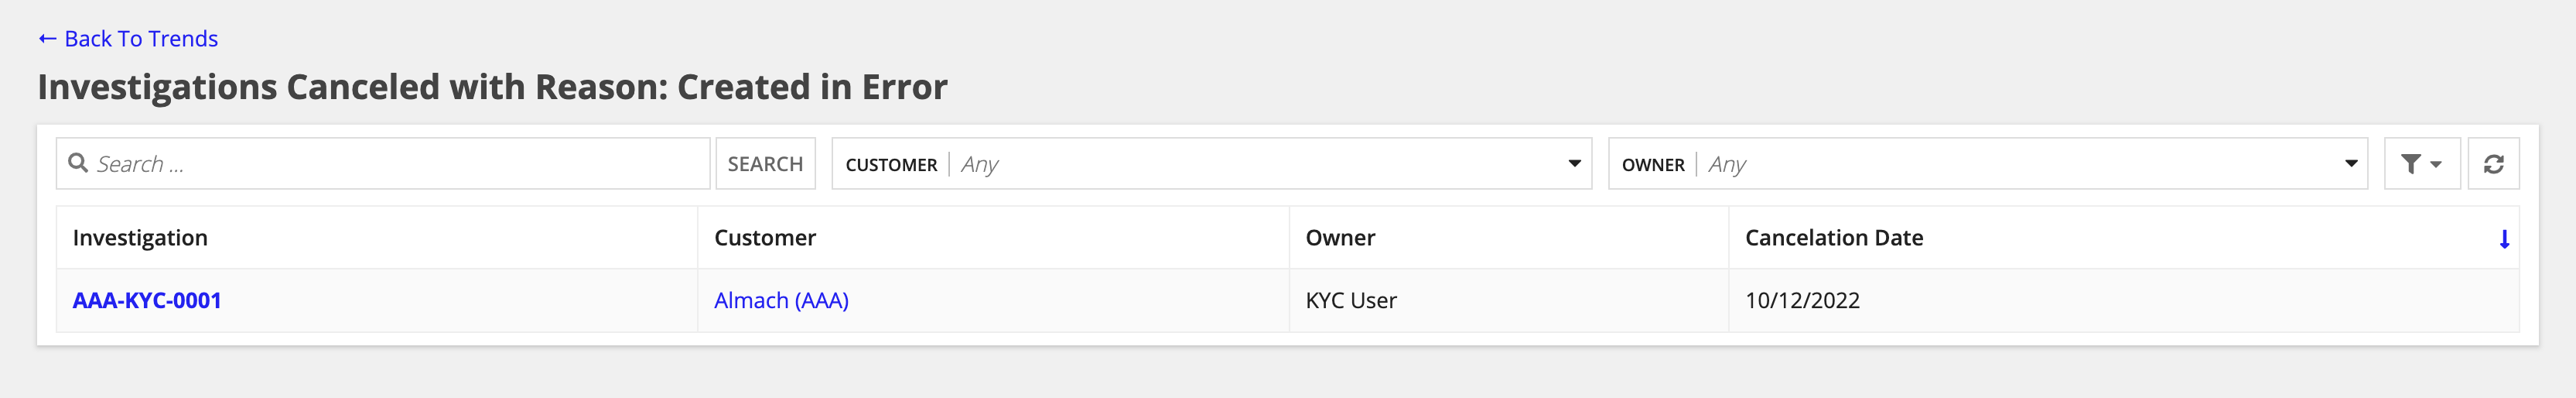 /kyc-canceled investigations record table